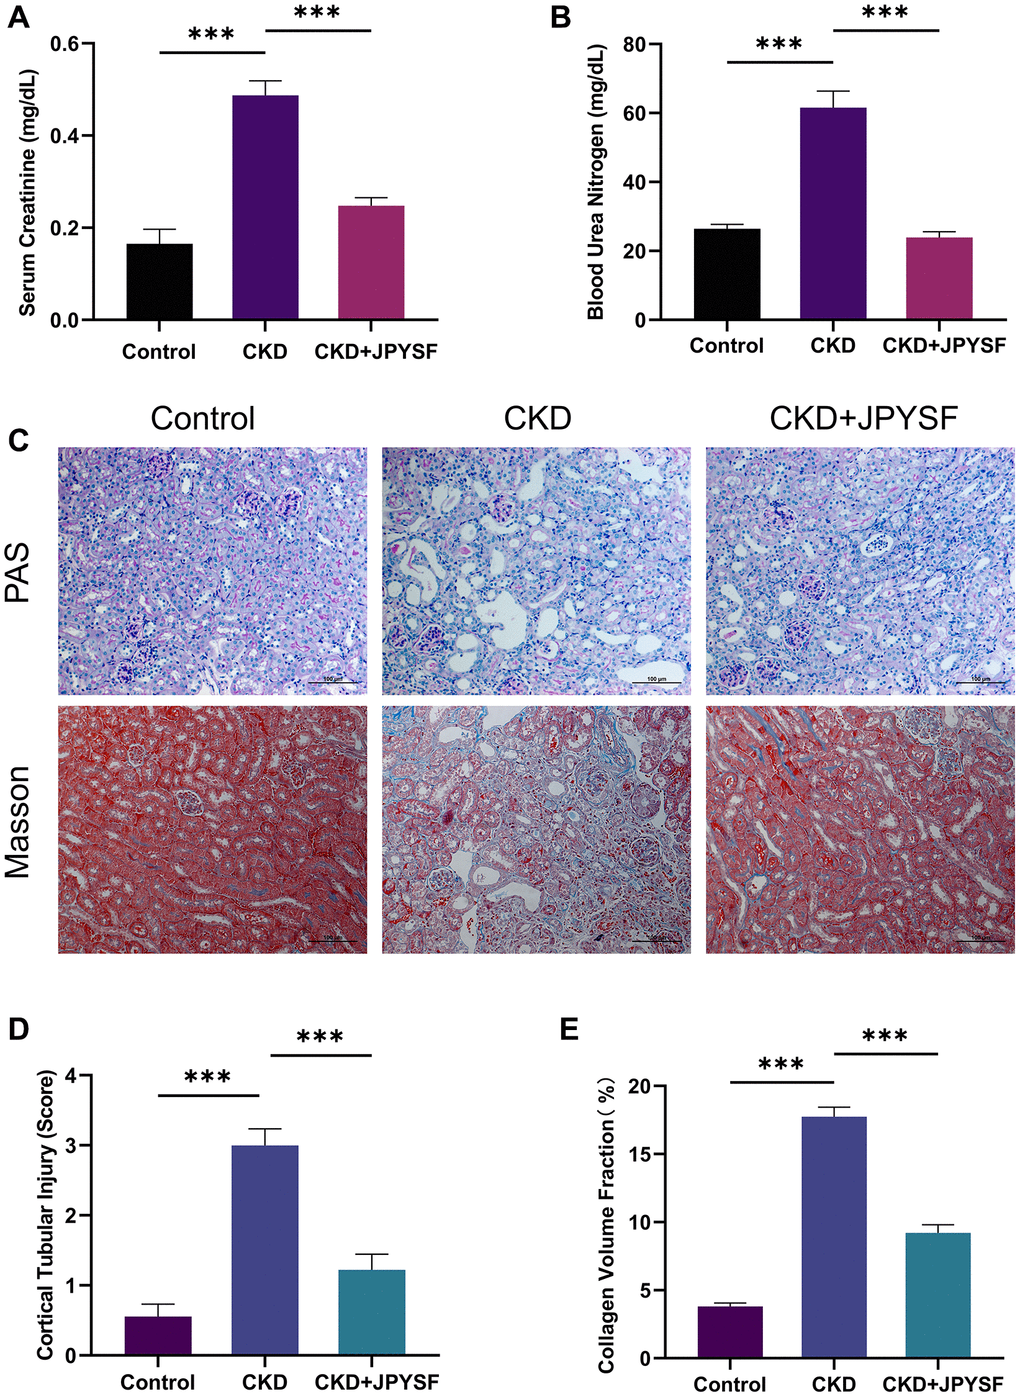 The effects of JPYSF on renal function and pathological injury in CKD mice. (A) Serum creatinine levels (n = 6). (B) Blood urea nitrogen levels (n = 6). (C) Representative PAS and Masson staining images. (D) Cortical tubular injury score (n = 3). (E) Collagen volume fraction (%) (n = 3). All images are shown at identical magnification, ×200, scale bar = 100 μm. Data are expressed as mean ± SEM (***p 